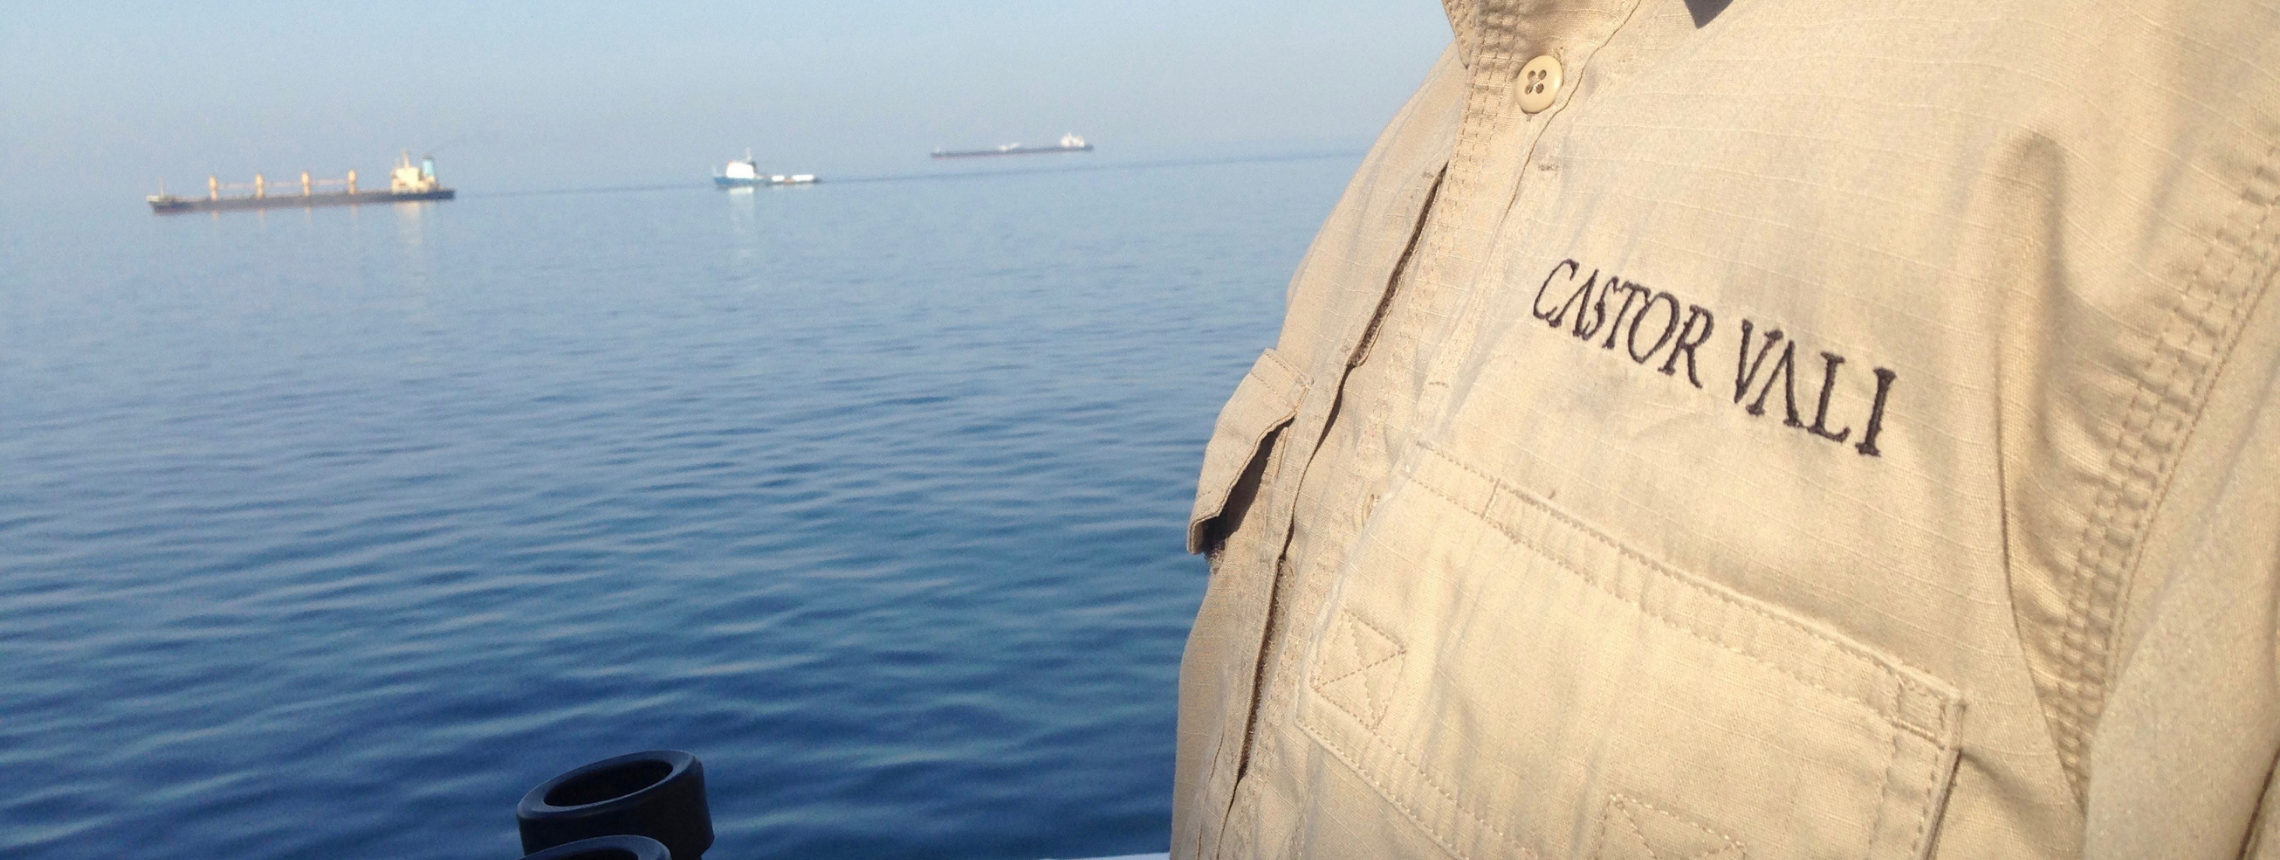 Man on board a ship in Castor Vali branded shirt holding binoculars, infront of three ships at sea.